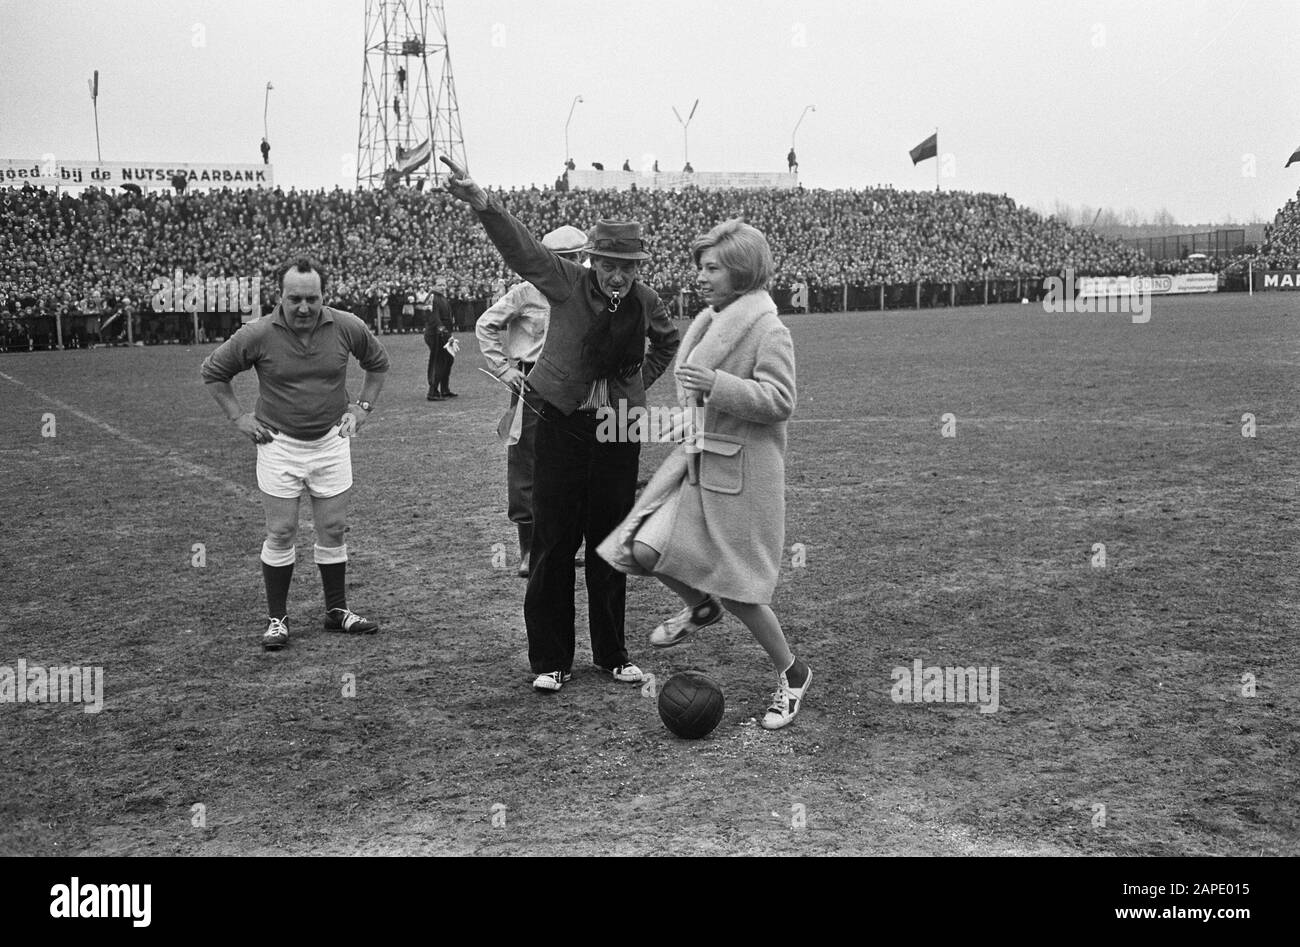 Artists soccer in The Hague, Moments from the match Date: March 14, 1965 Location: The Hague, South Holland Keywords: artists, sports, football Stock Photo